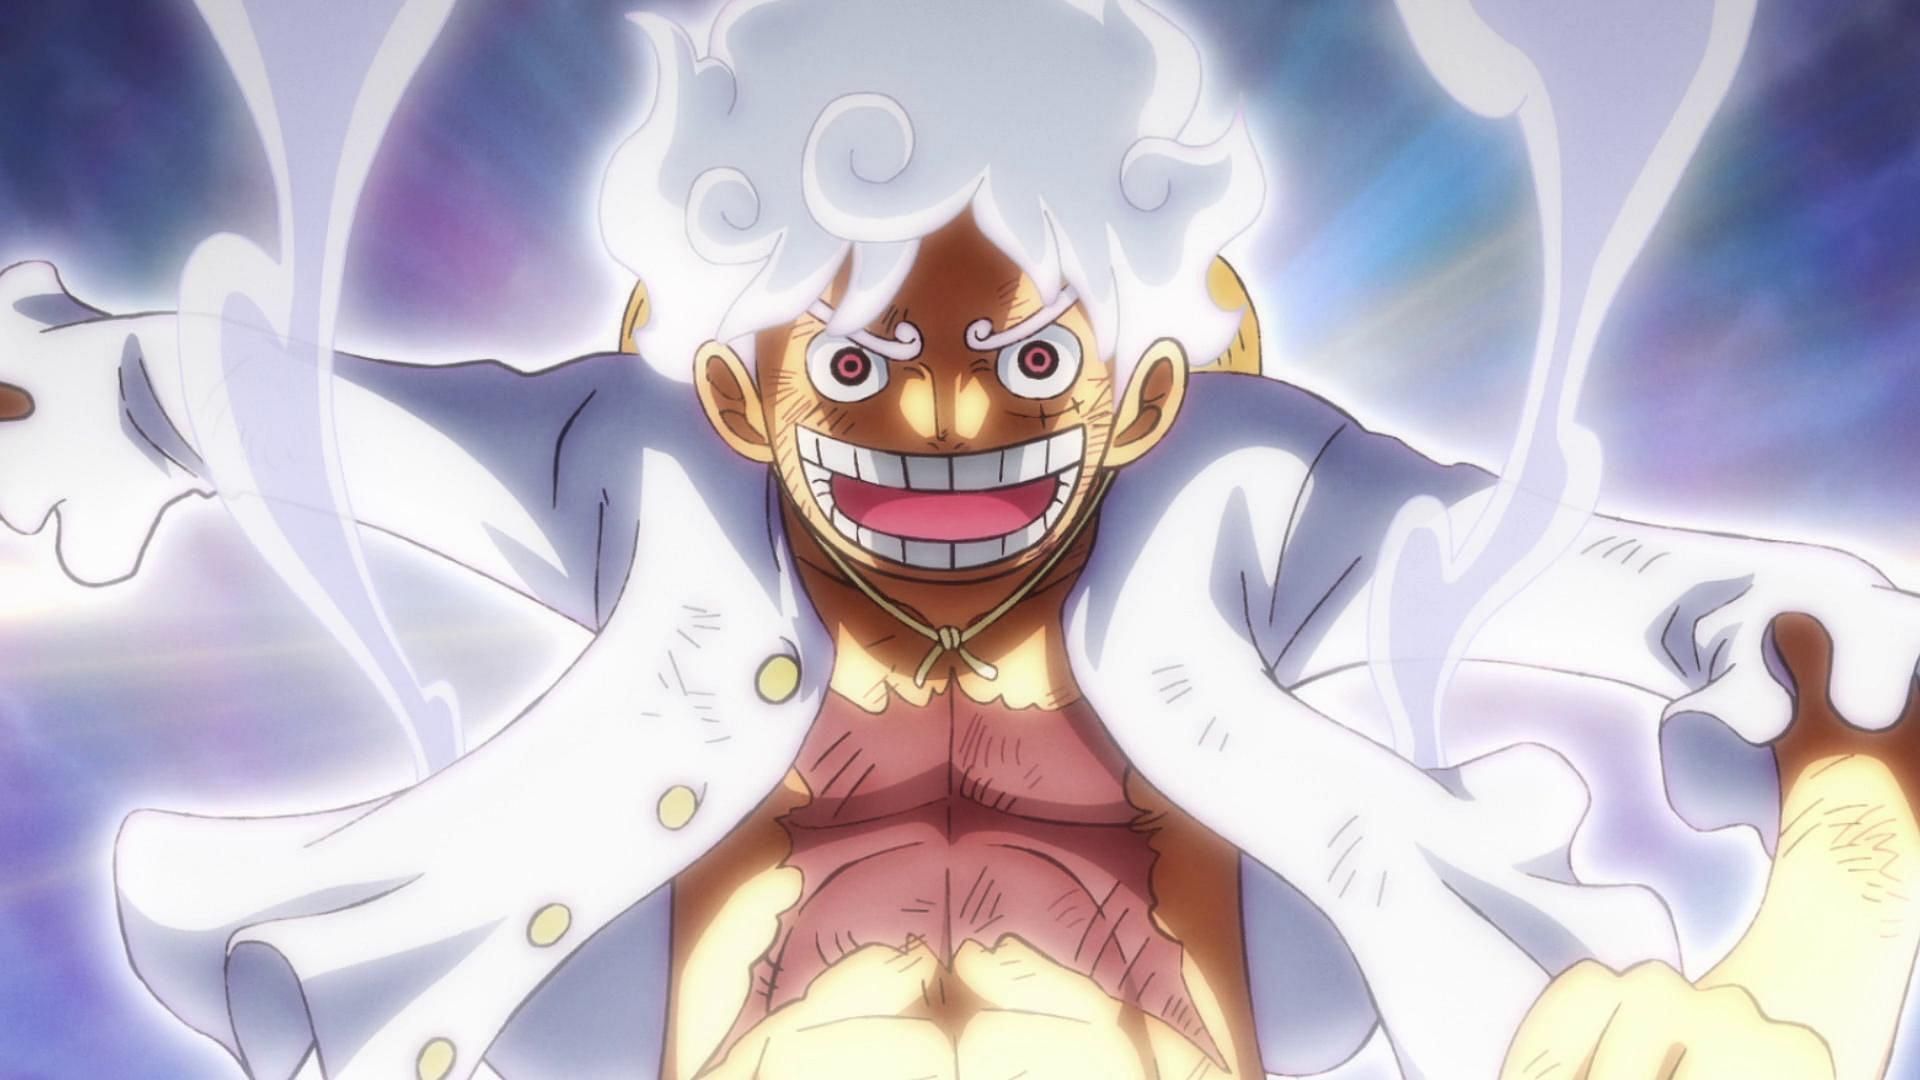 Luffy will have to give his best effort in the next One Piece chapters (Image via Toei Animation)